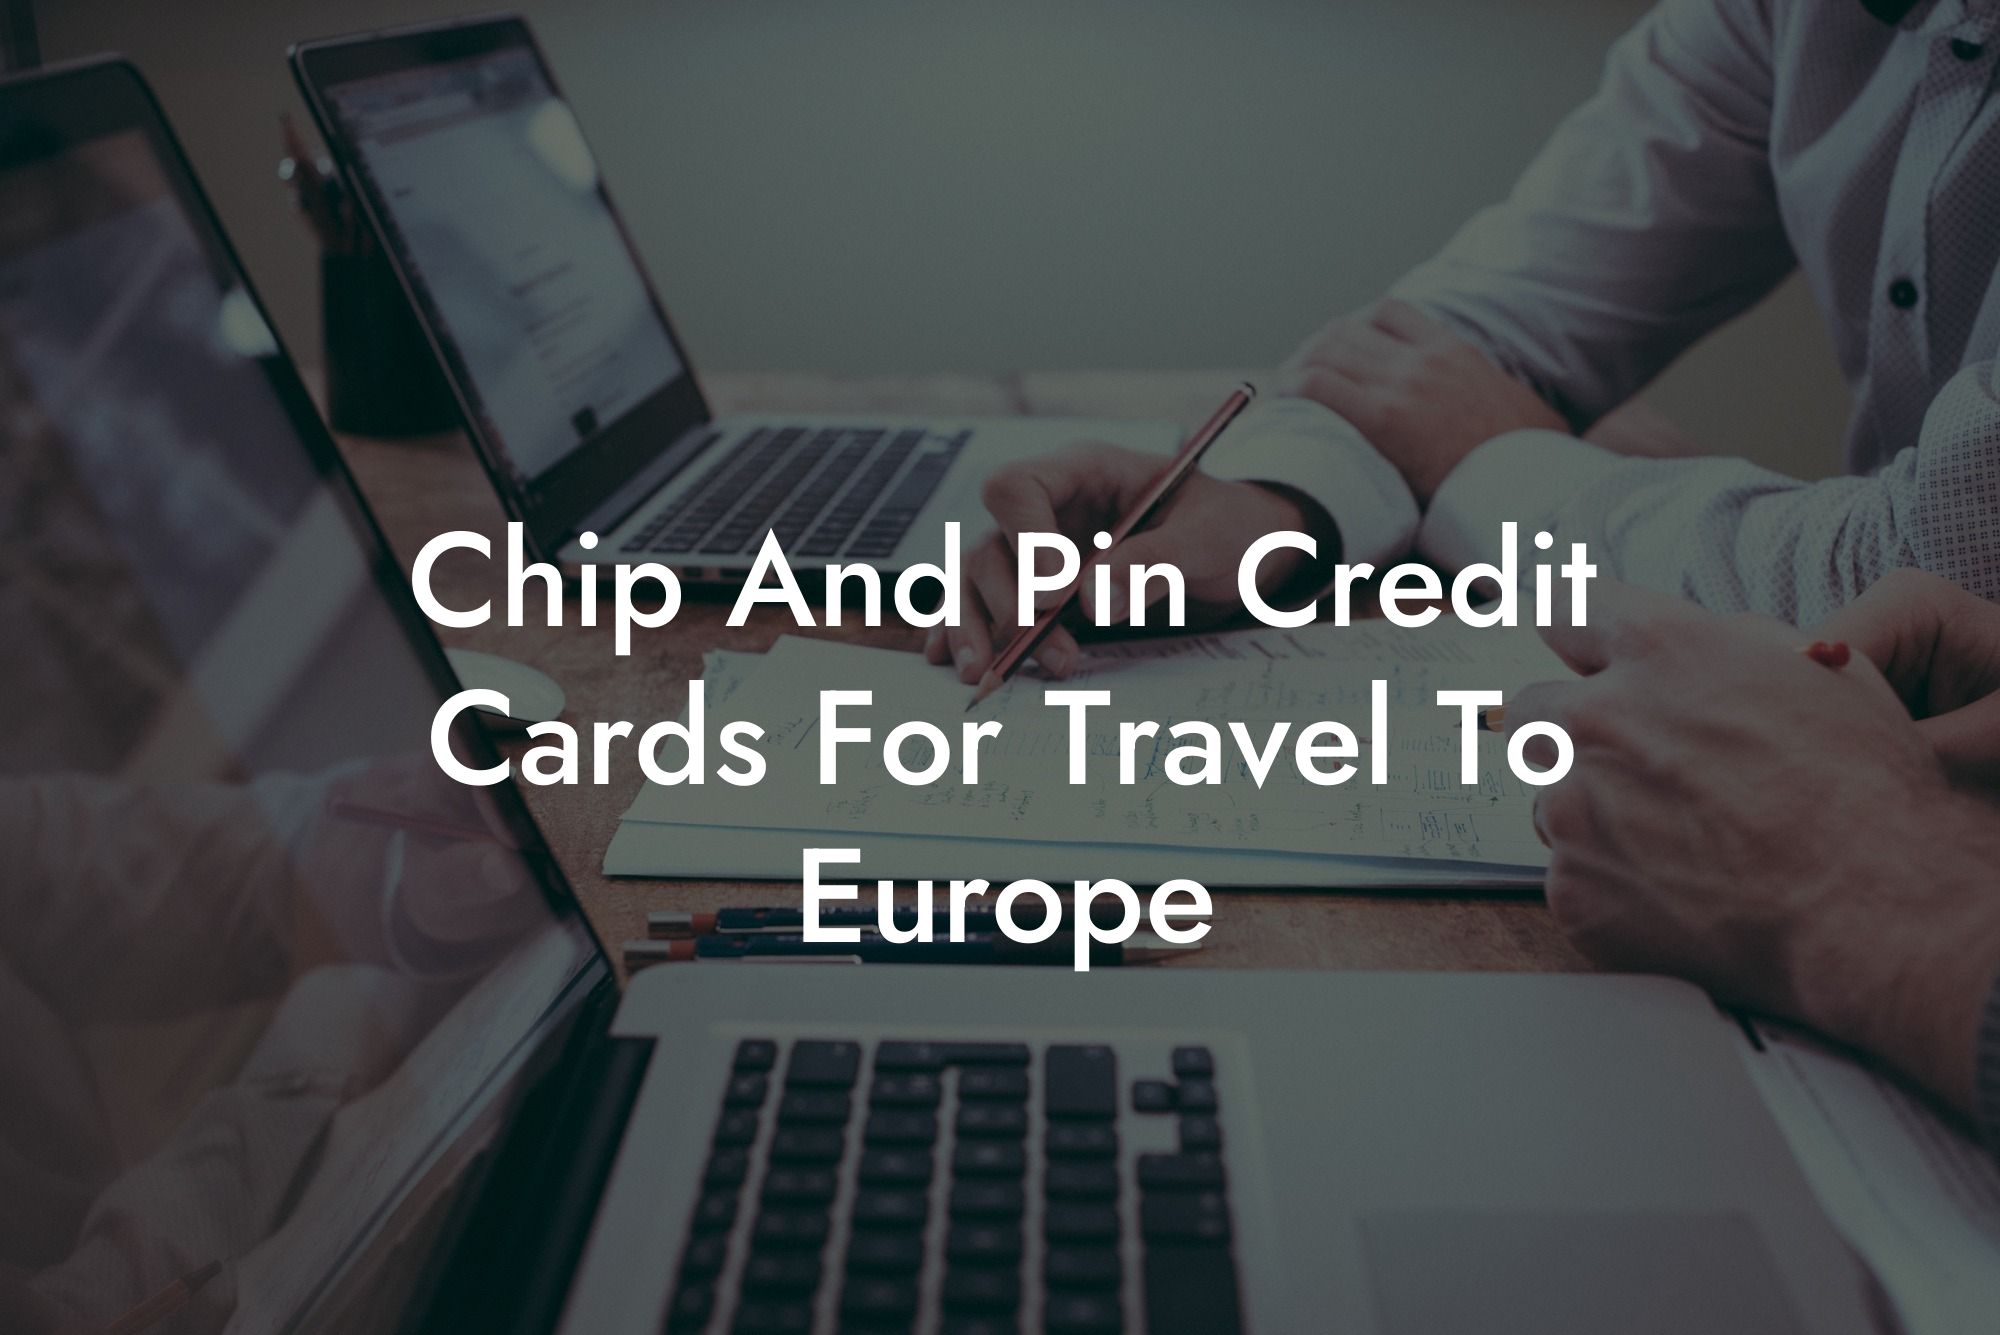 Chip And Pin Credit Cards For Travel To Europe